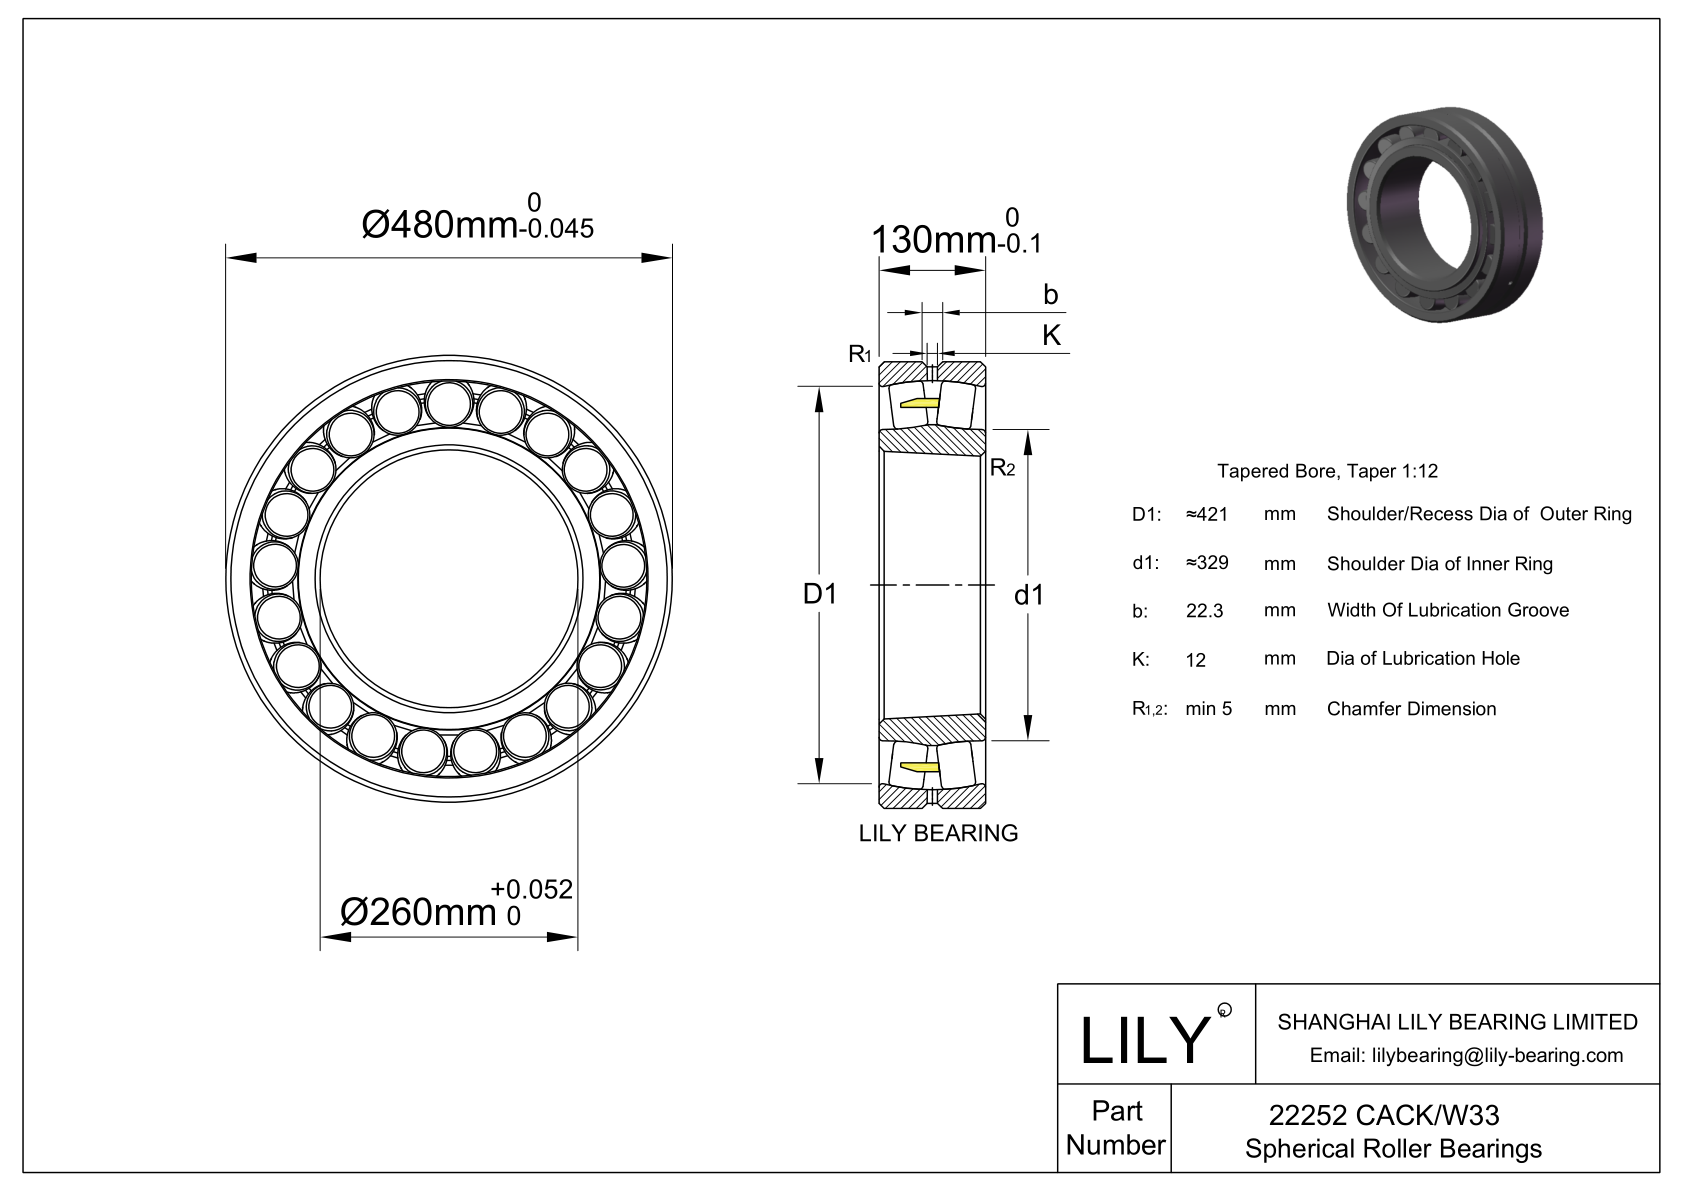 22252 CACK/W33 Double Row Spherical Roller Bearing cad drawing